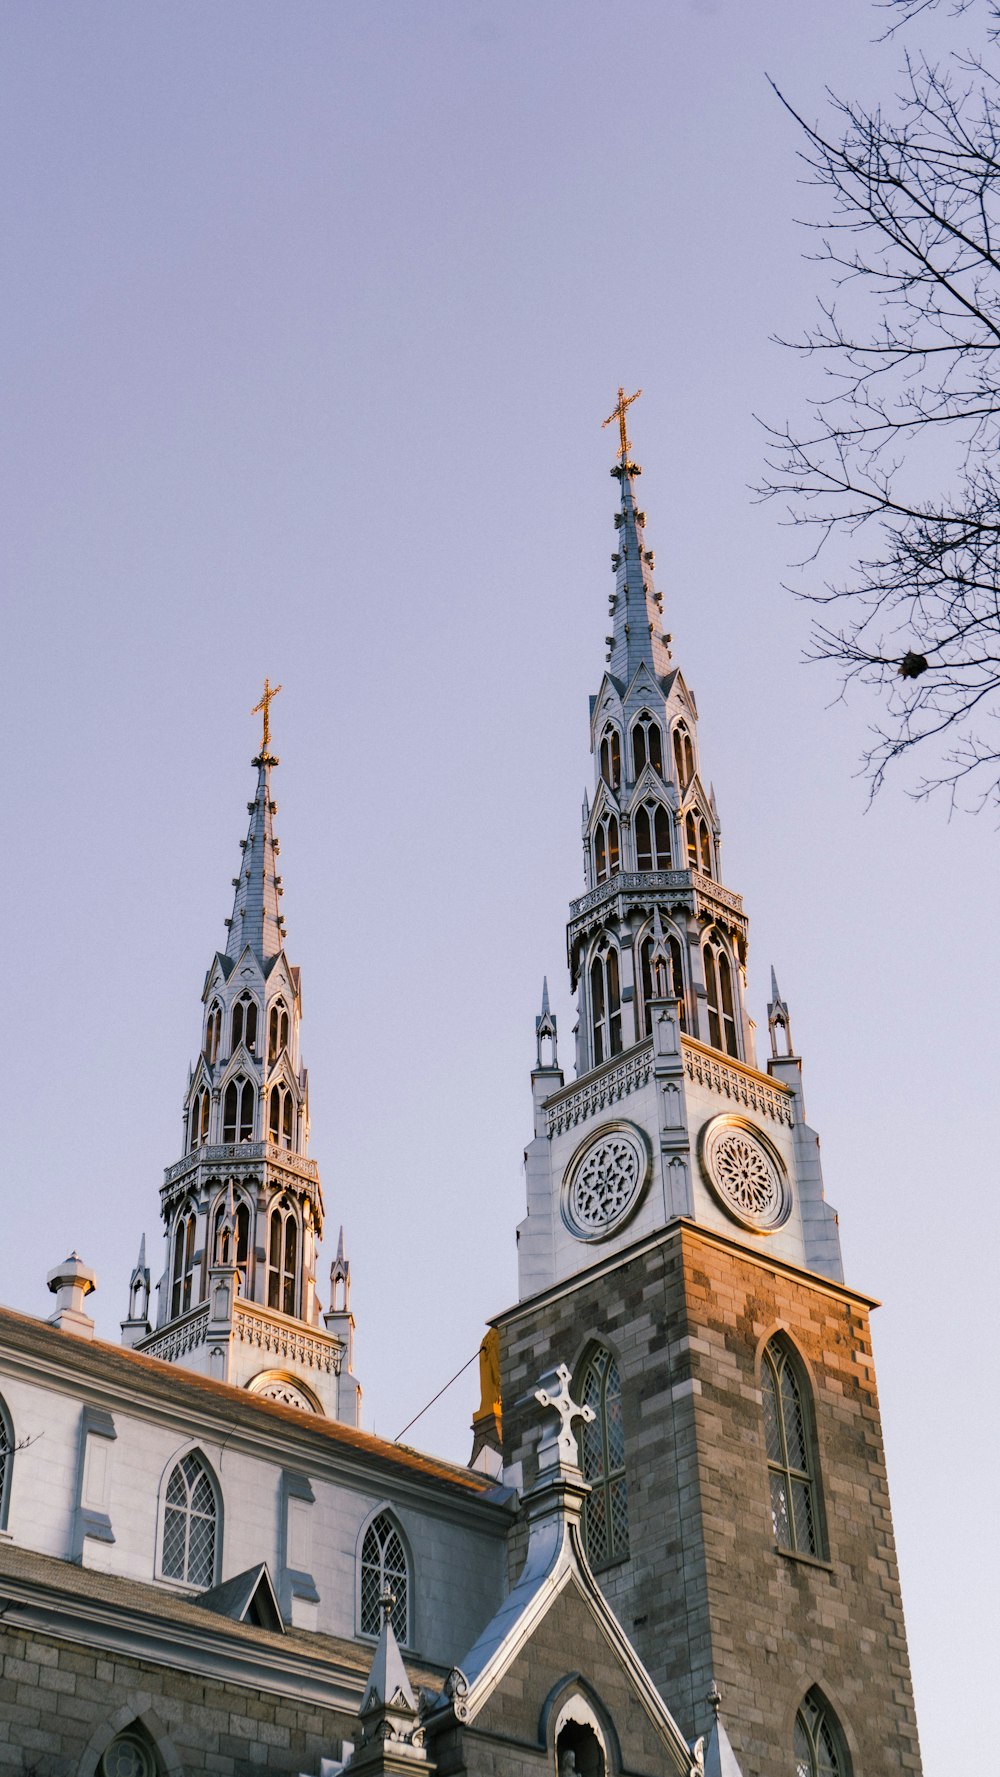 a church with two steeples and a clock tower